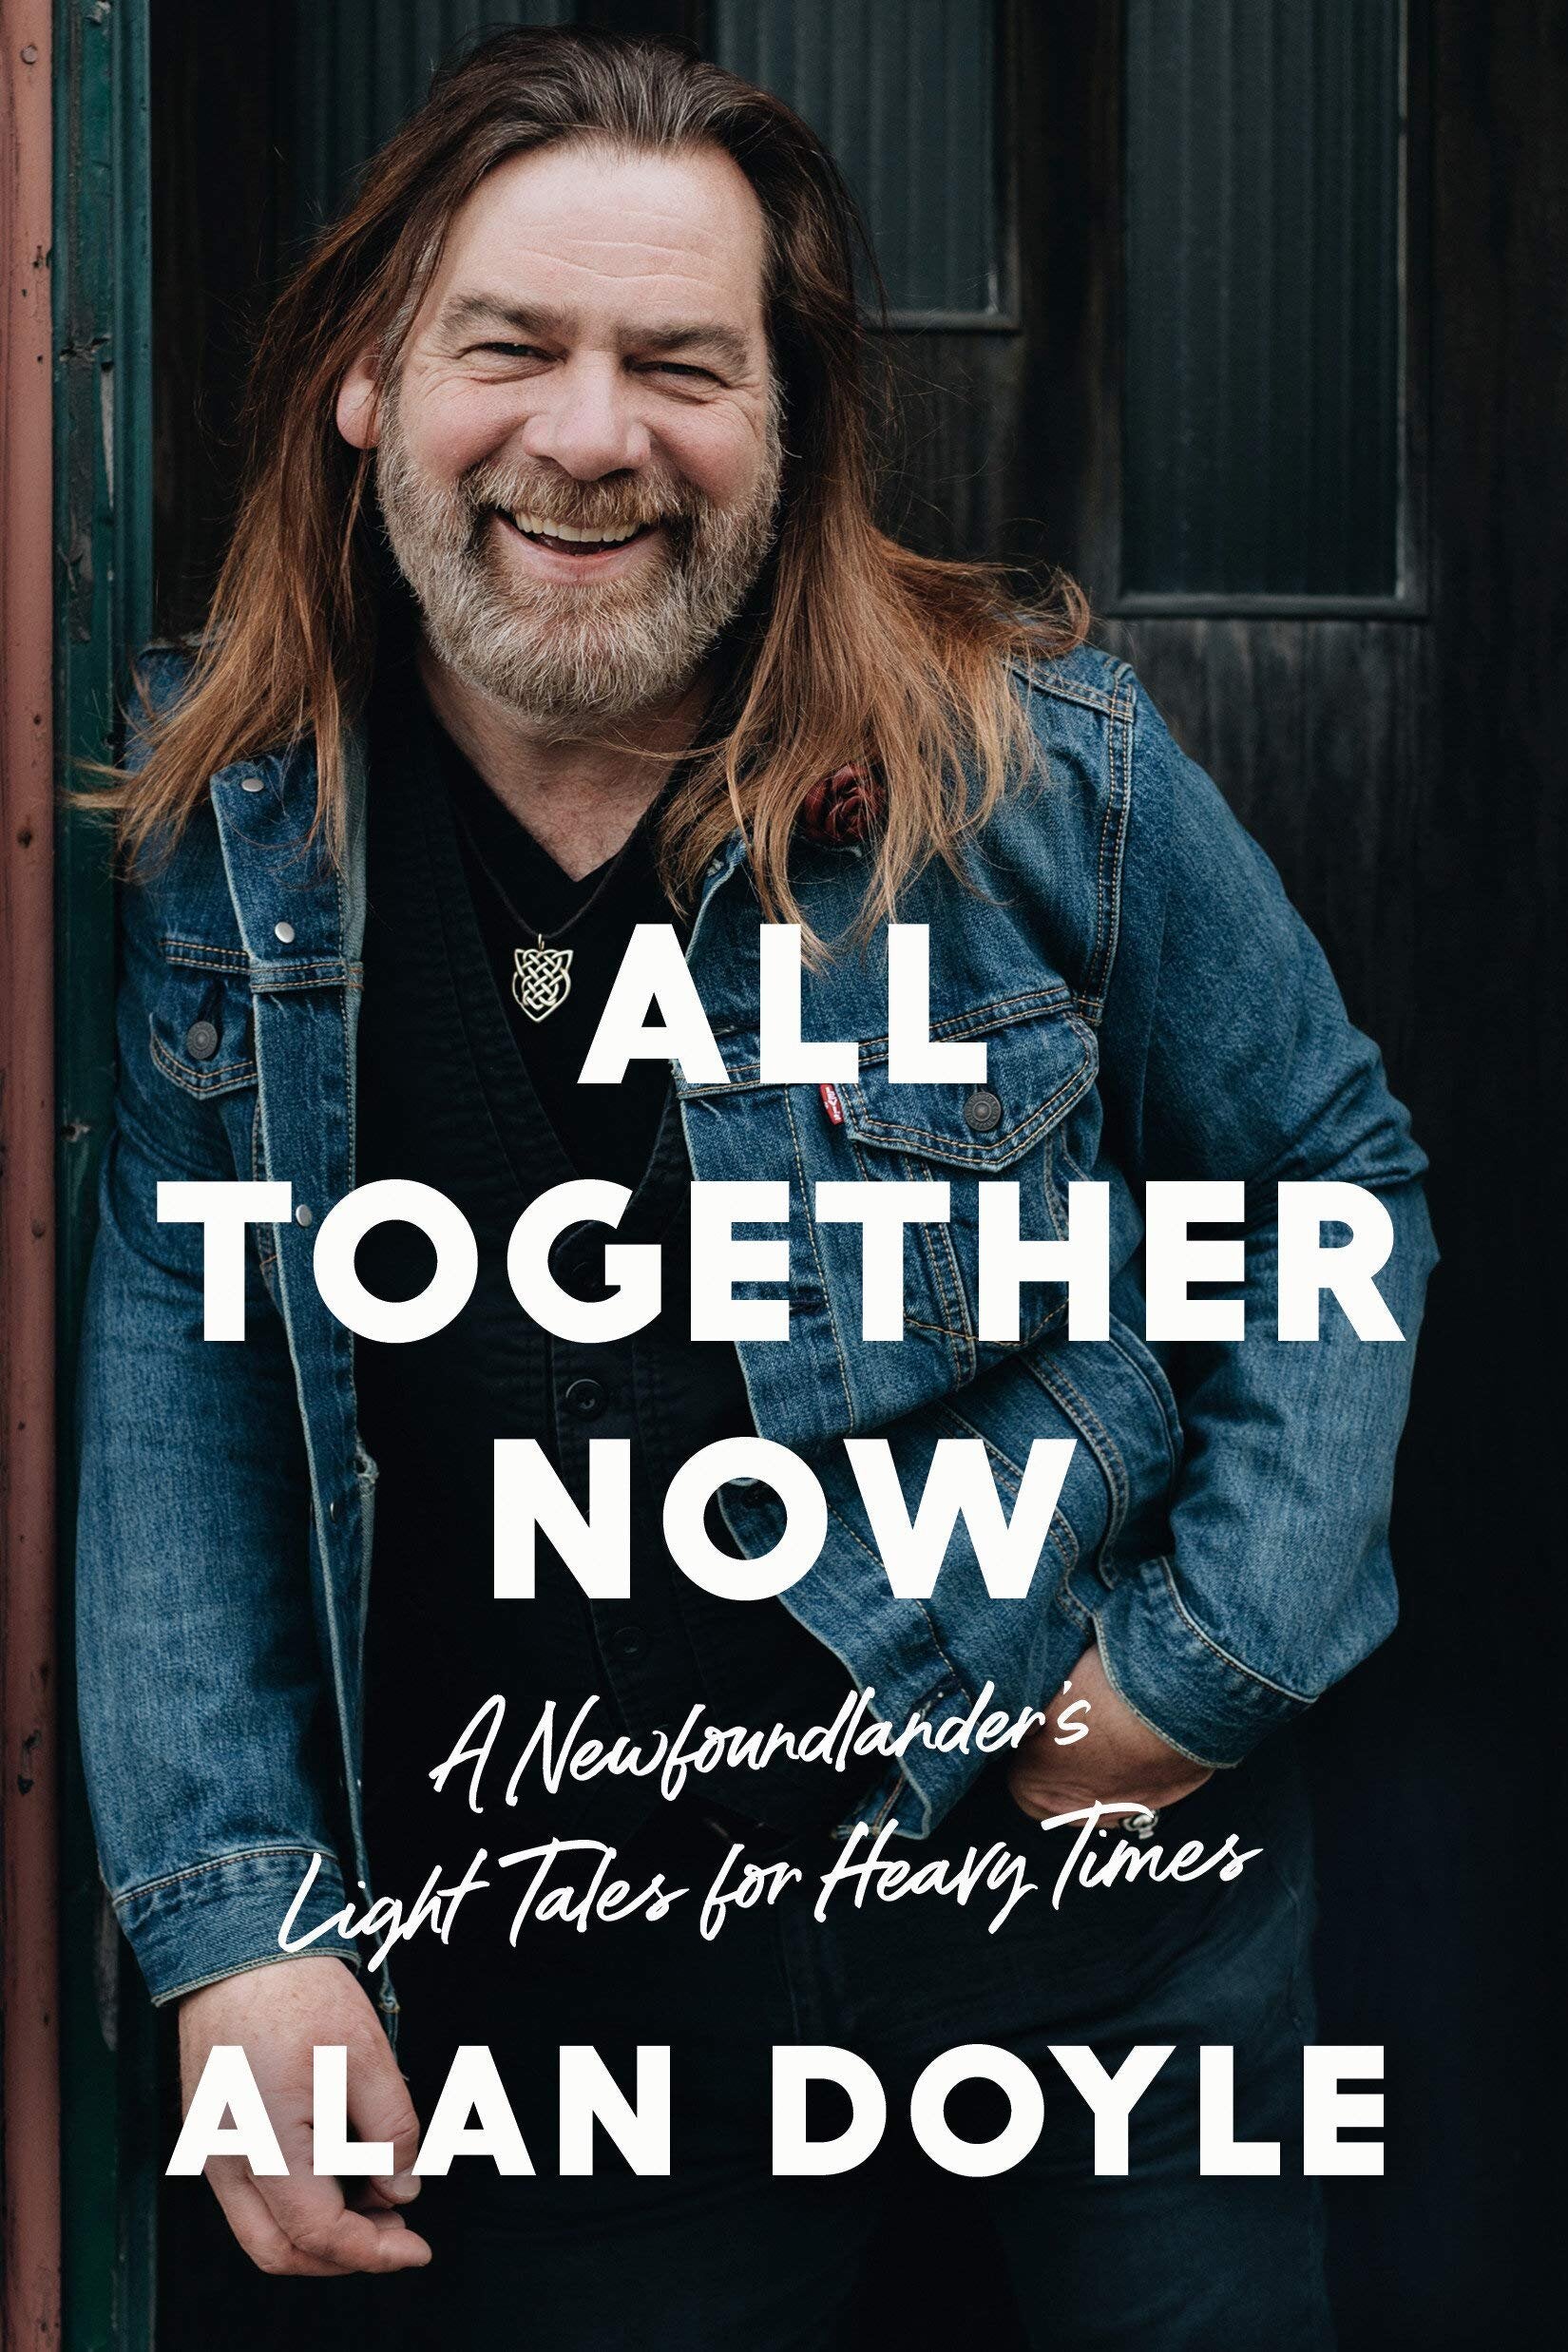 All Together Now - Hardcopy